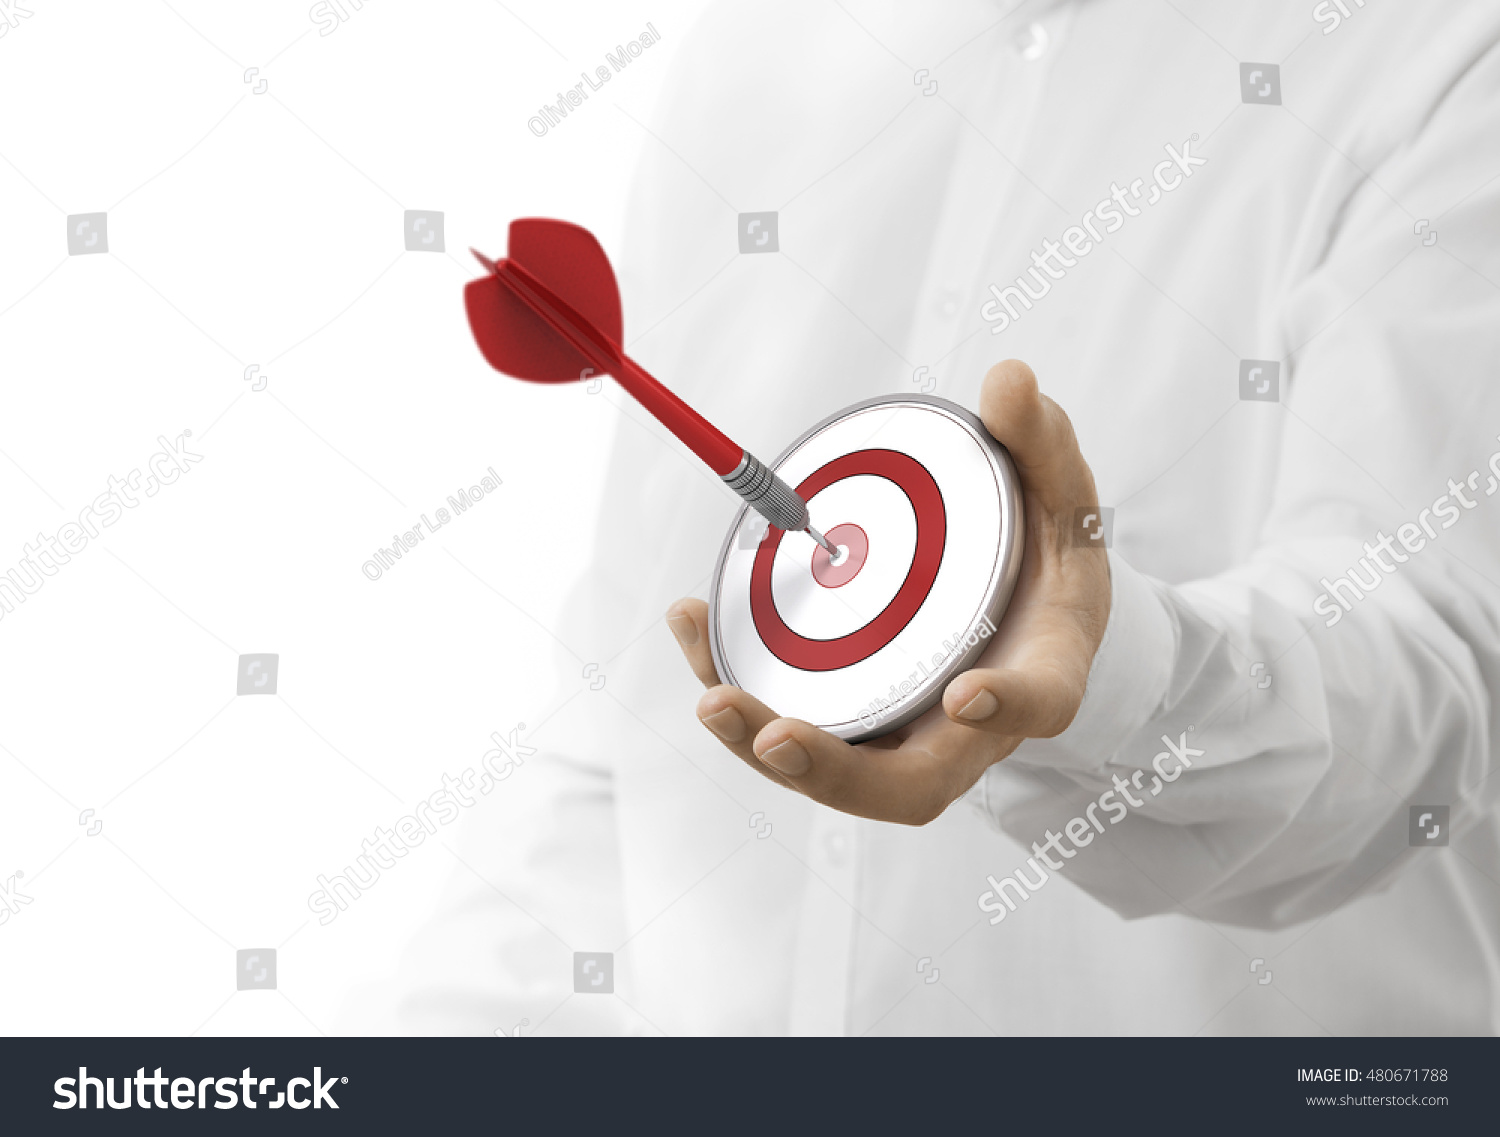 caucasian man holding a modern target with a dart in the center. image over white background. Concept of objective attainment. #480671788